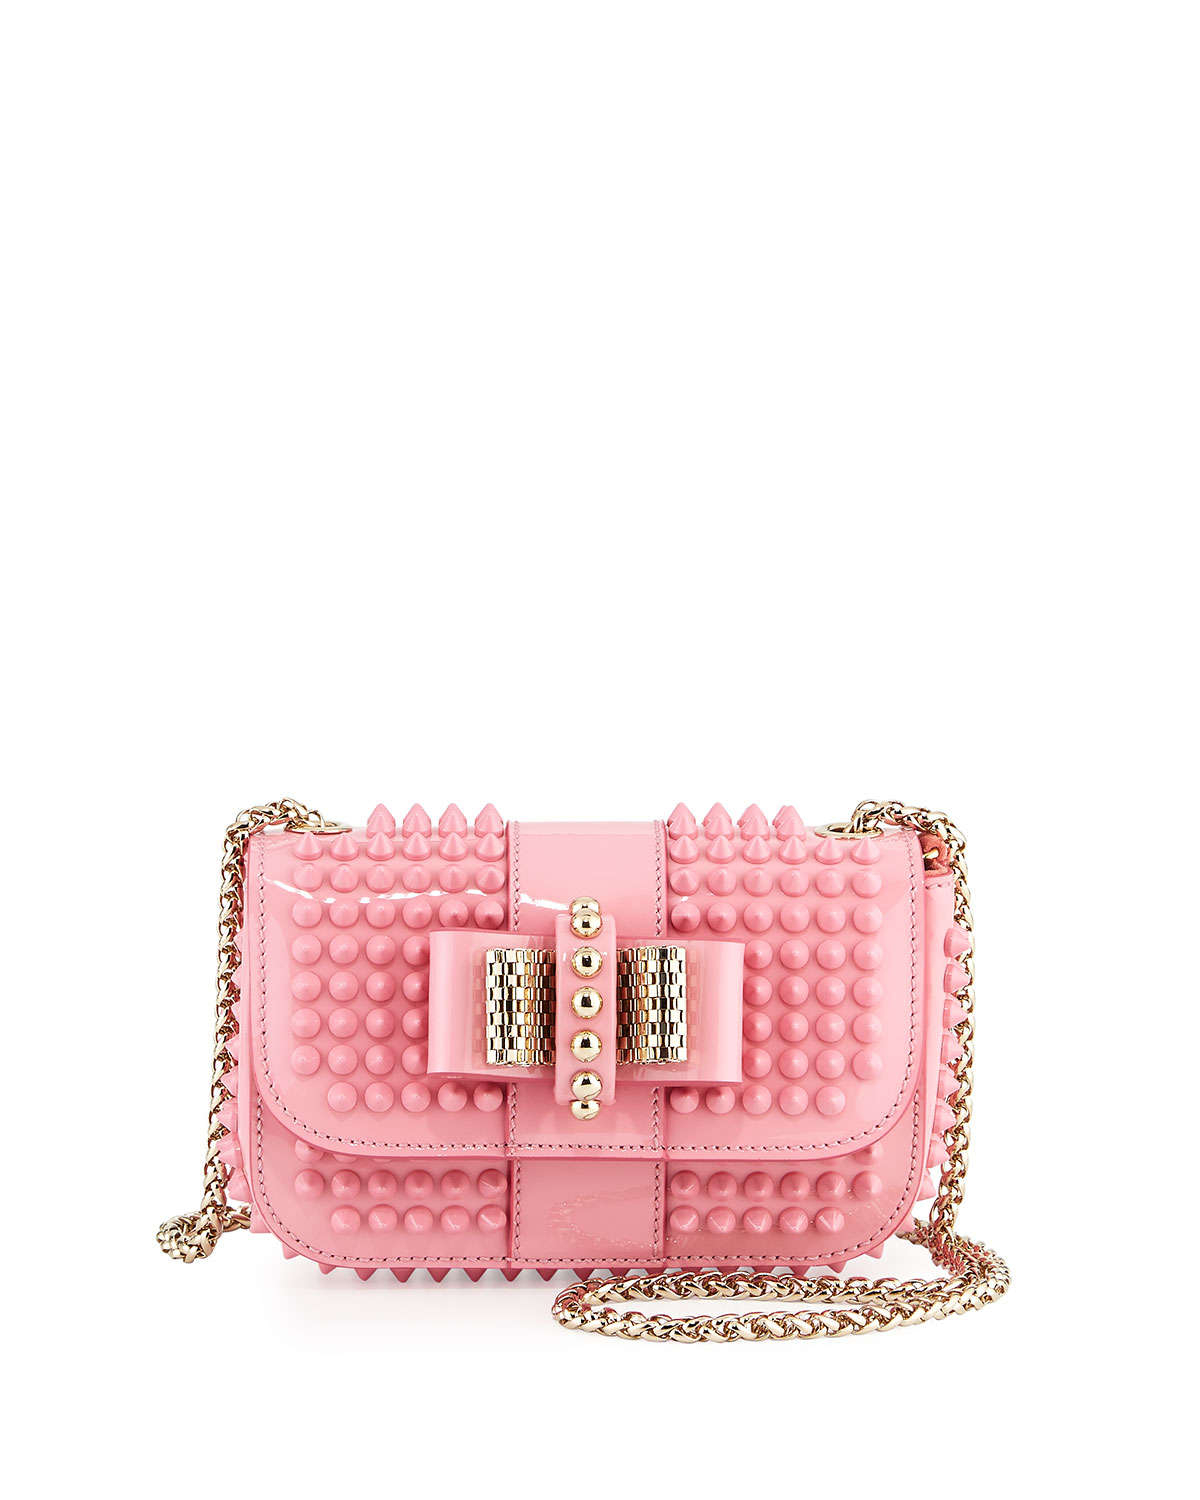 Christian louboutin Sweet Charity Small Spiked Cross-Body Bag in Pink ...